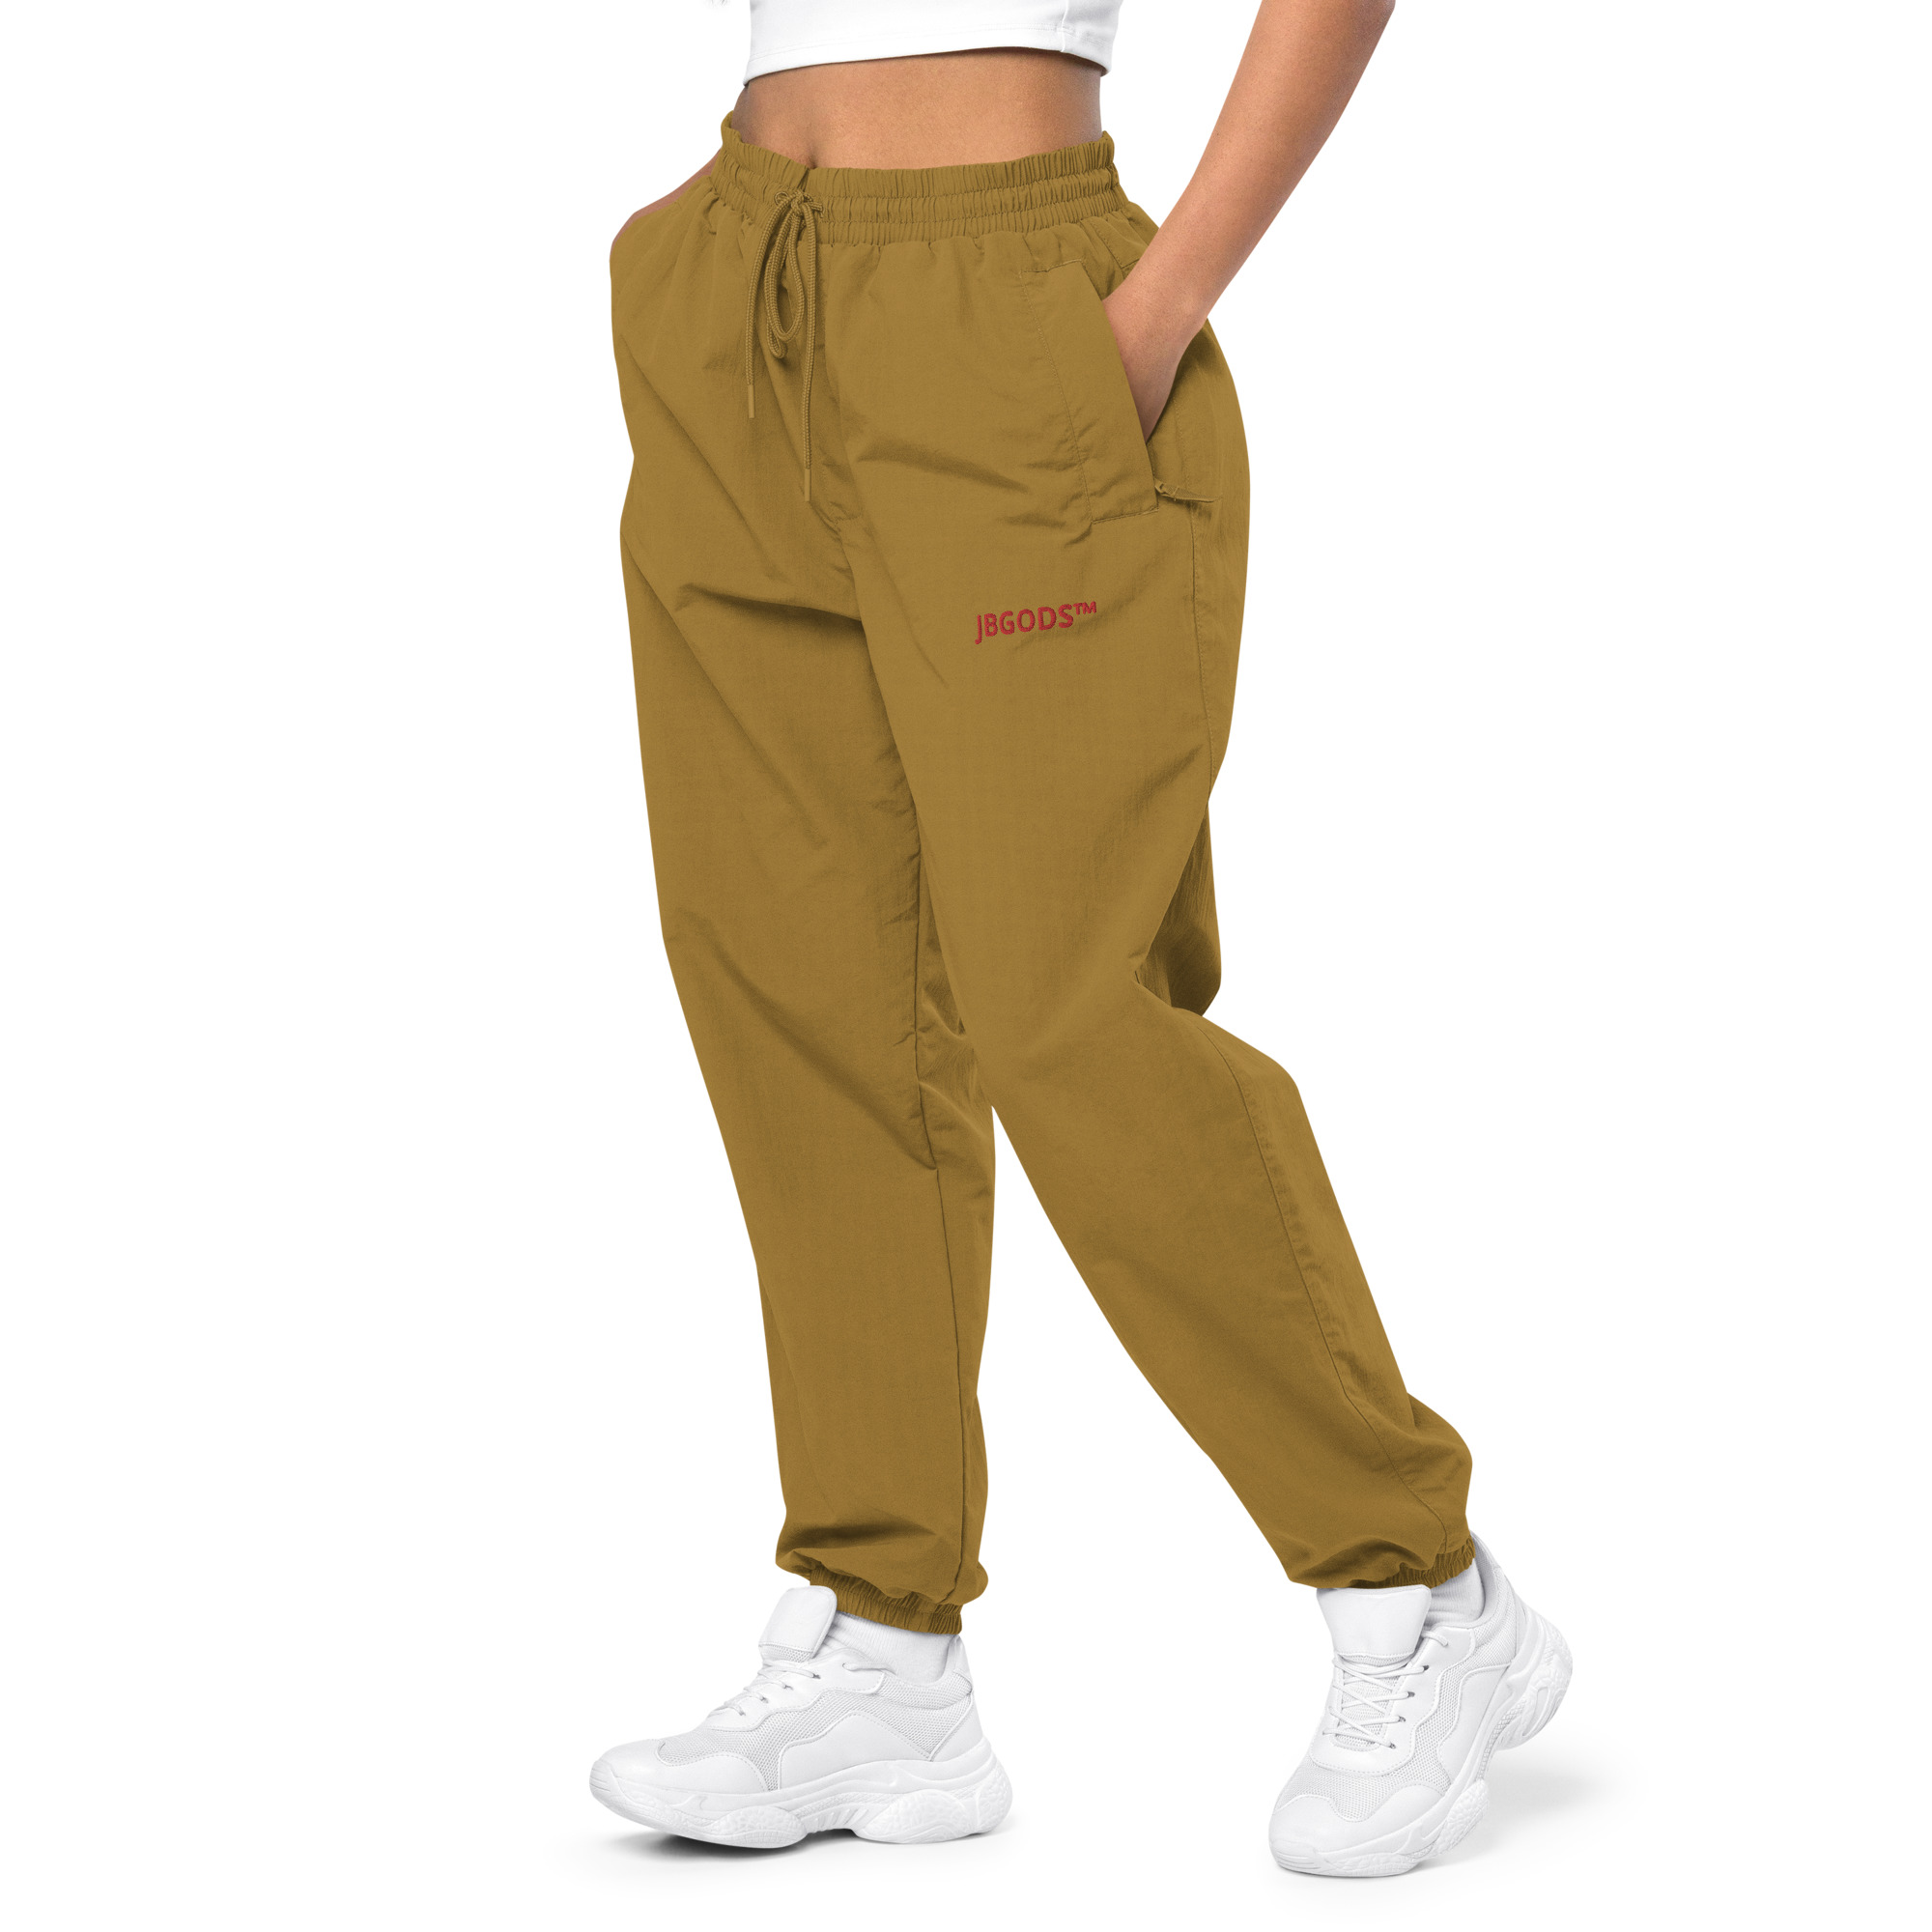 tracksuit trousers olive color